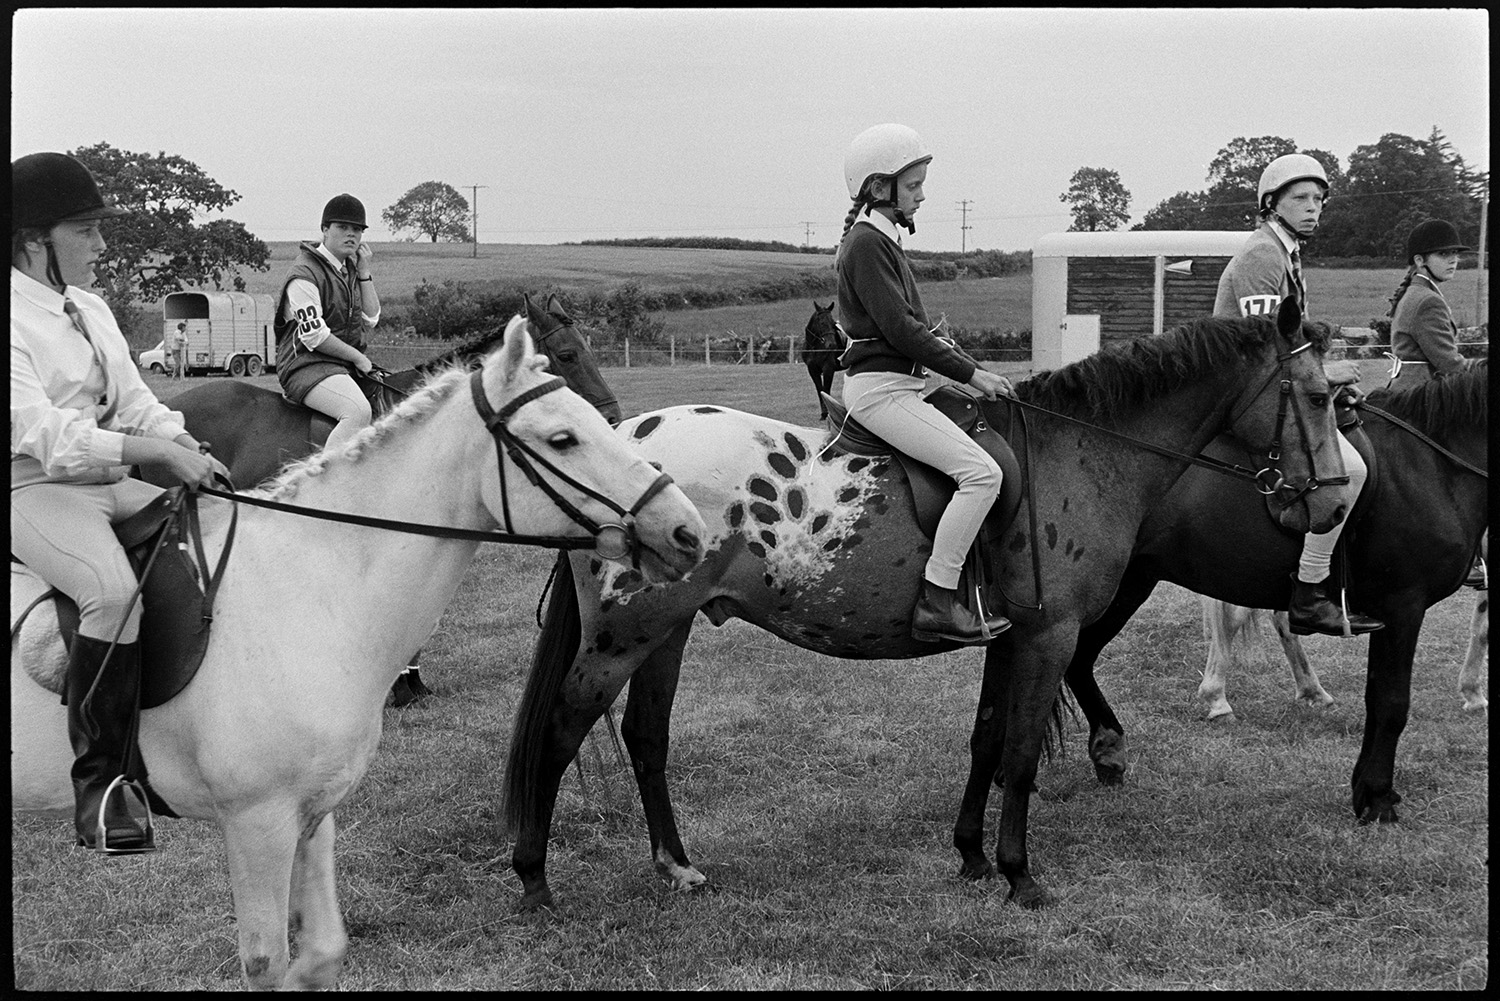 Gymkhana at Fair, horses, ponies and riders. Old bus. 
[Children on horses getting ready to compete in an event at the gymkhana at Winkleigh Fair. One of the horses has interesting markings.]